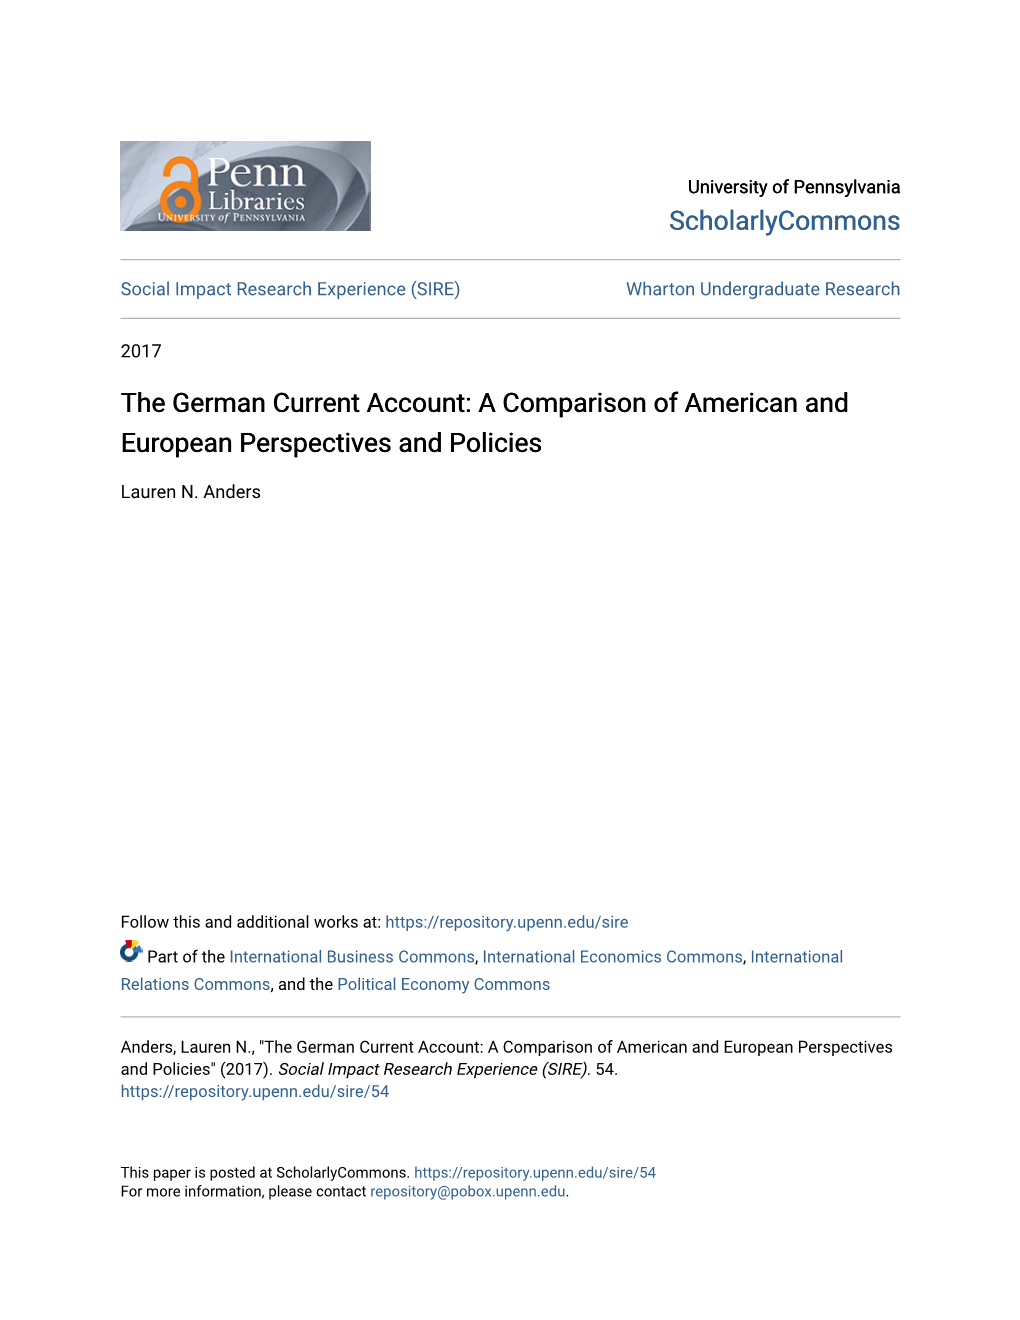 The German Current Account: a Comparison of American and European Perspectives and Policies